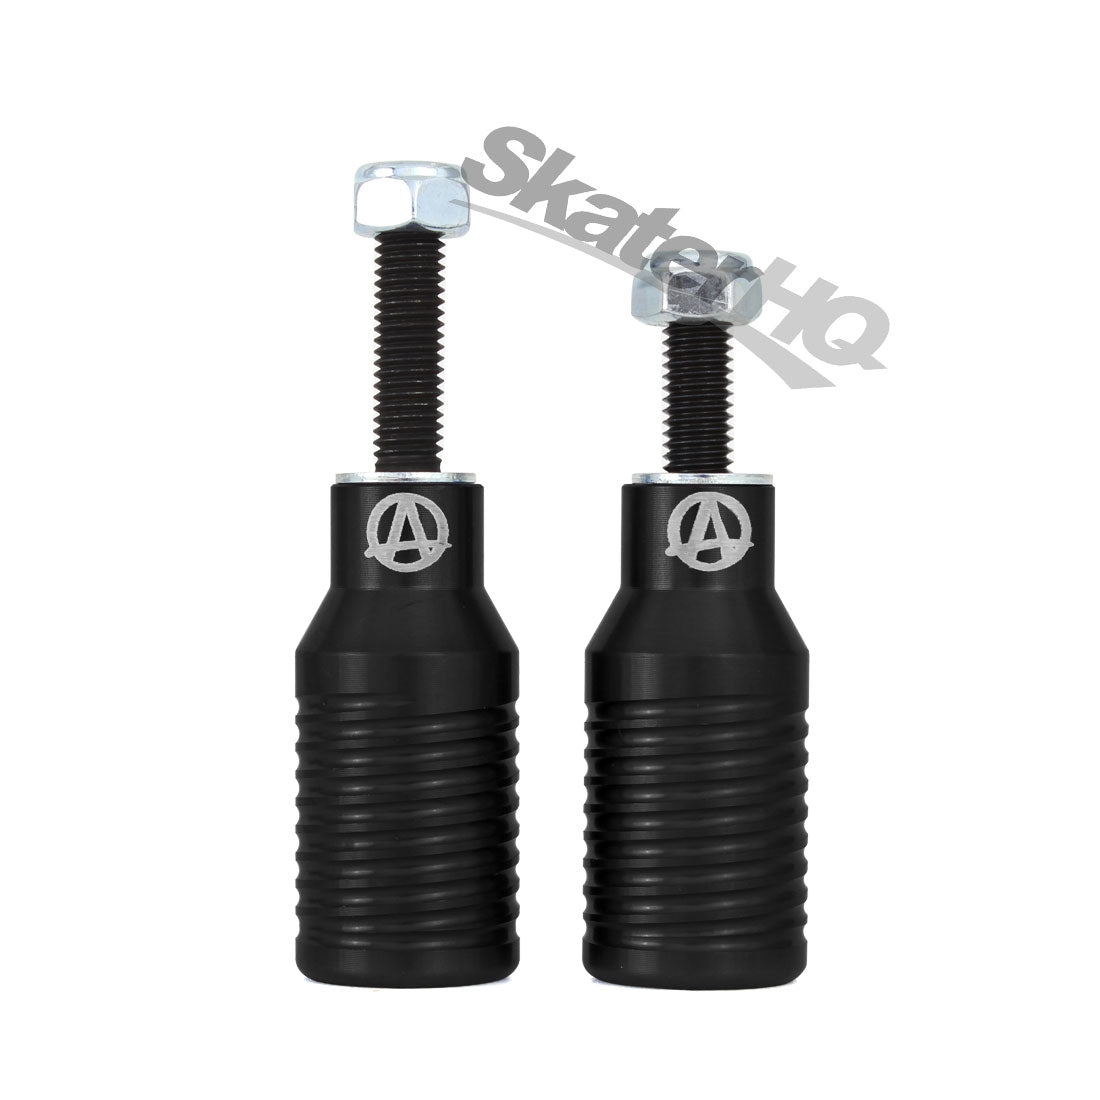 Apex Bowie Pegs 2pk - Black Scooter Hardware and Parts